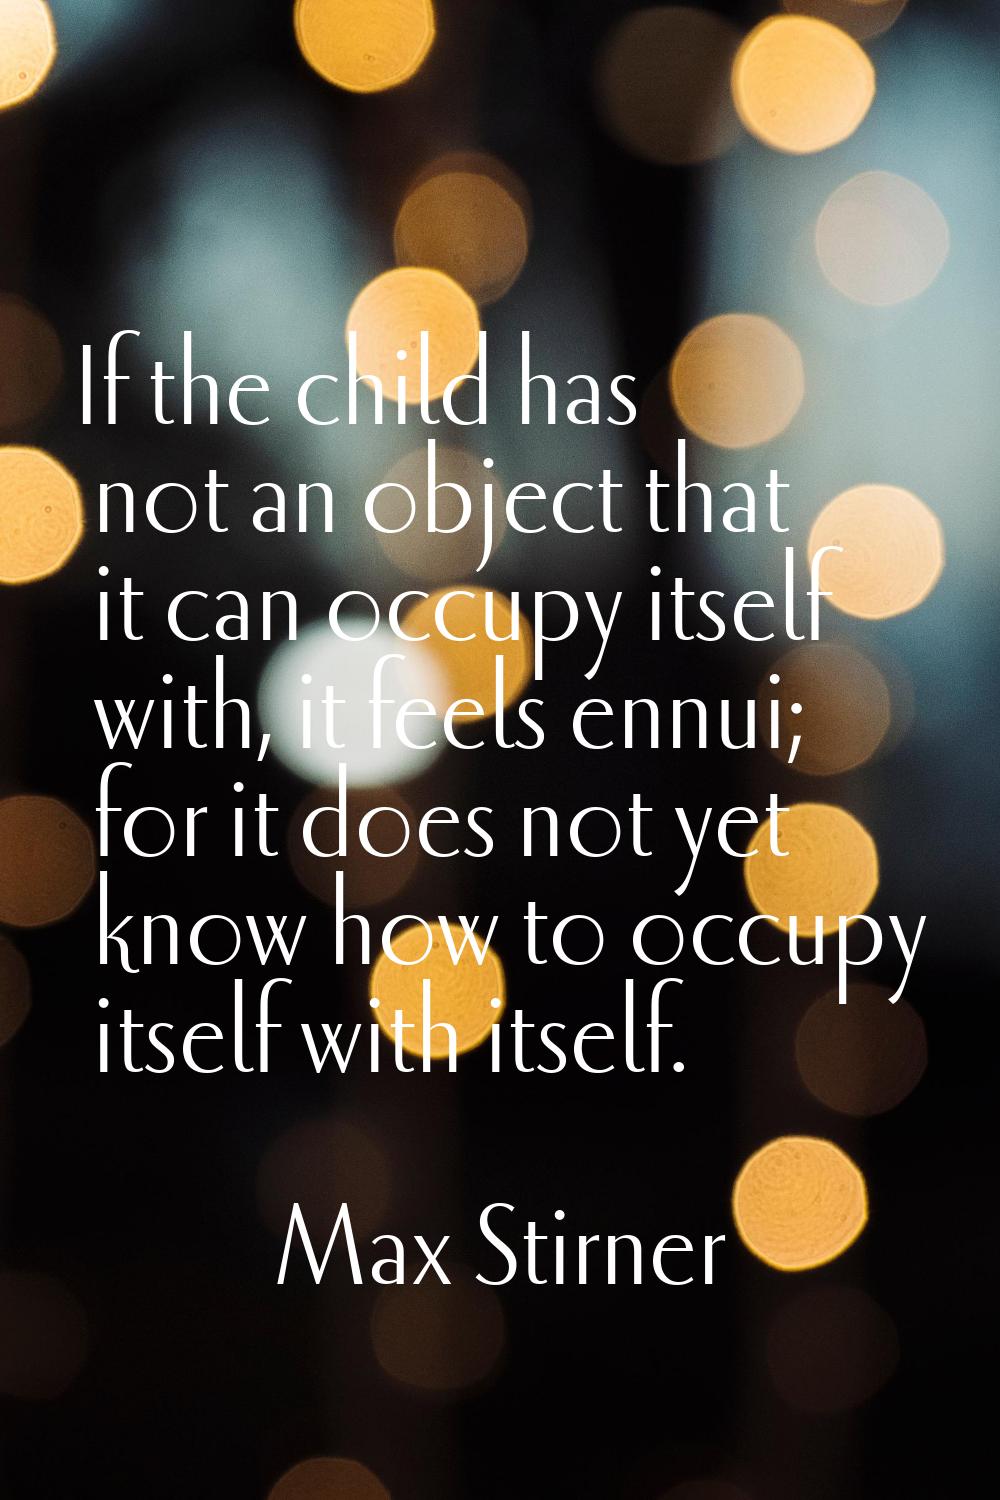 If the child has not an object that it can occupy itself with, it feels ennui; for it does not yet 